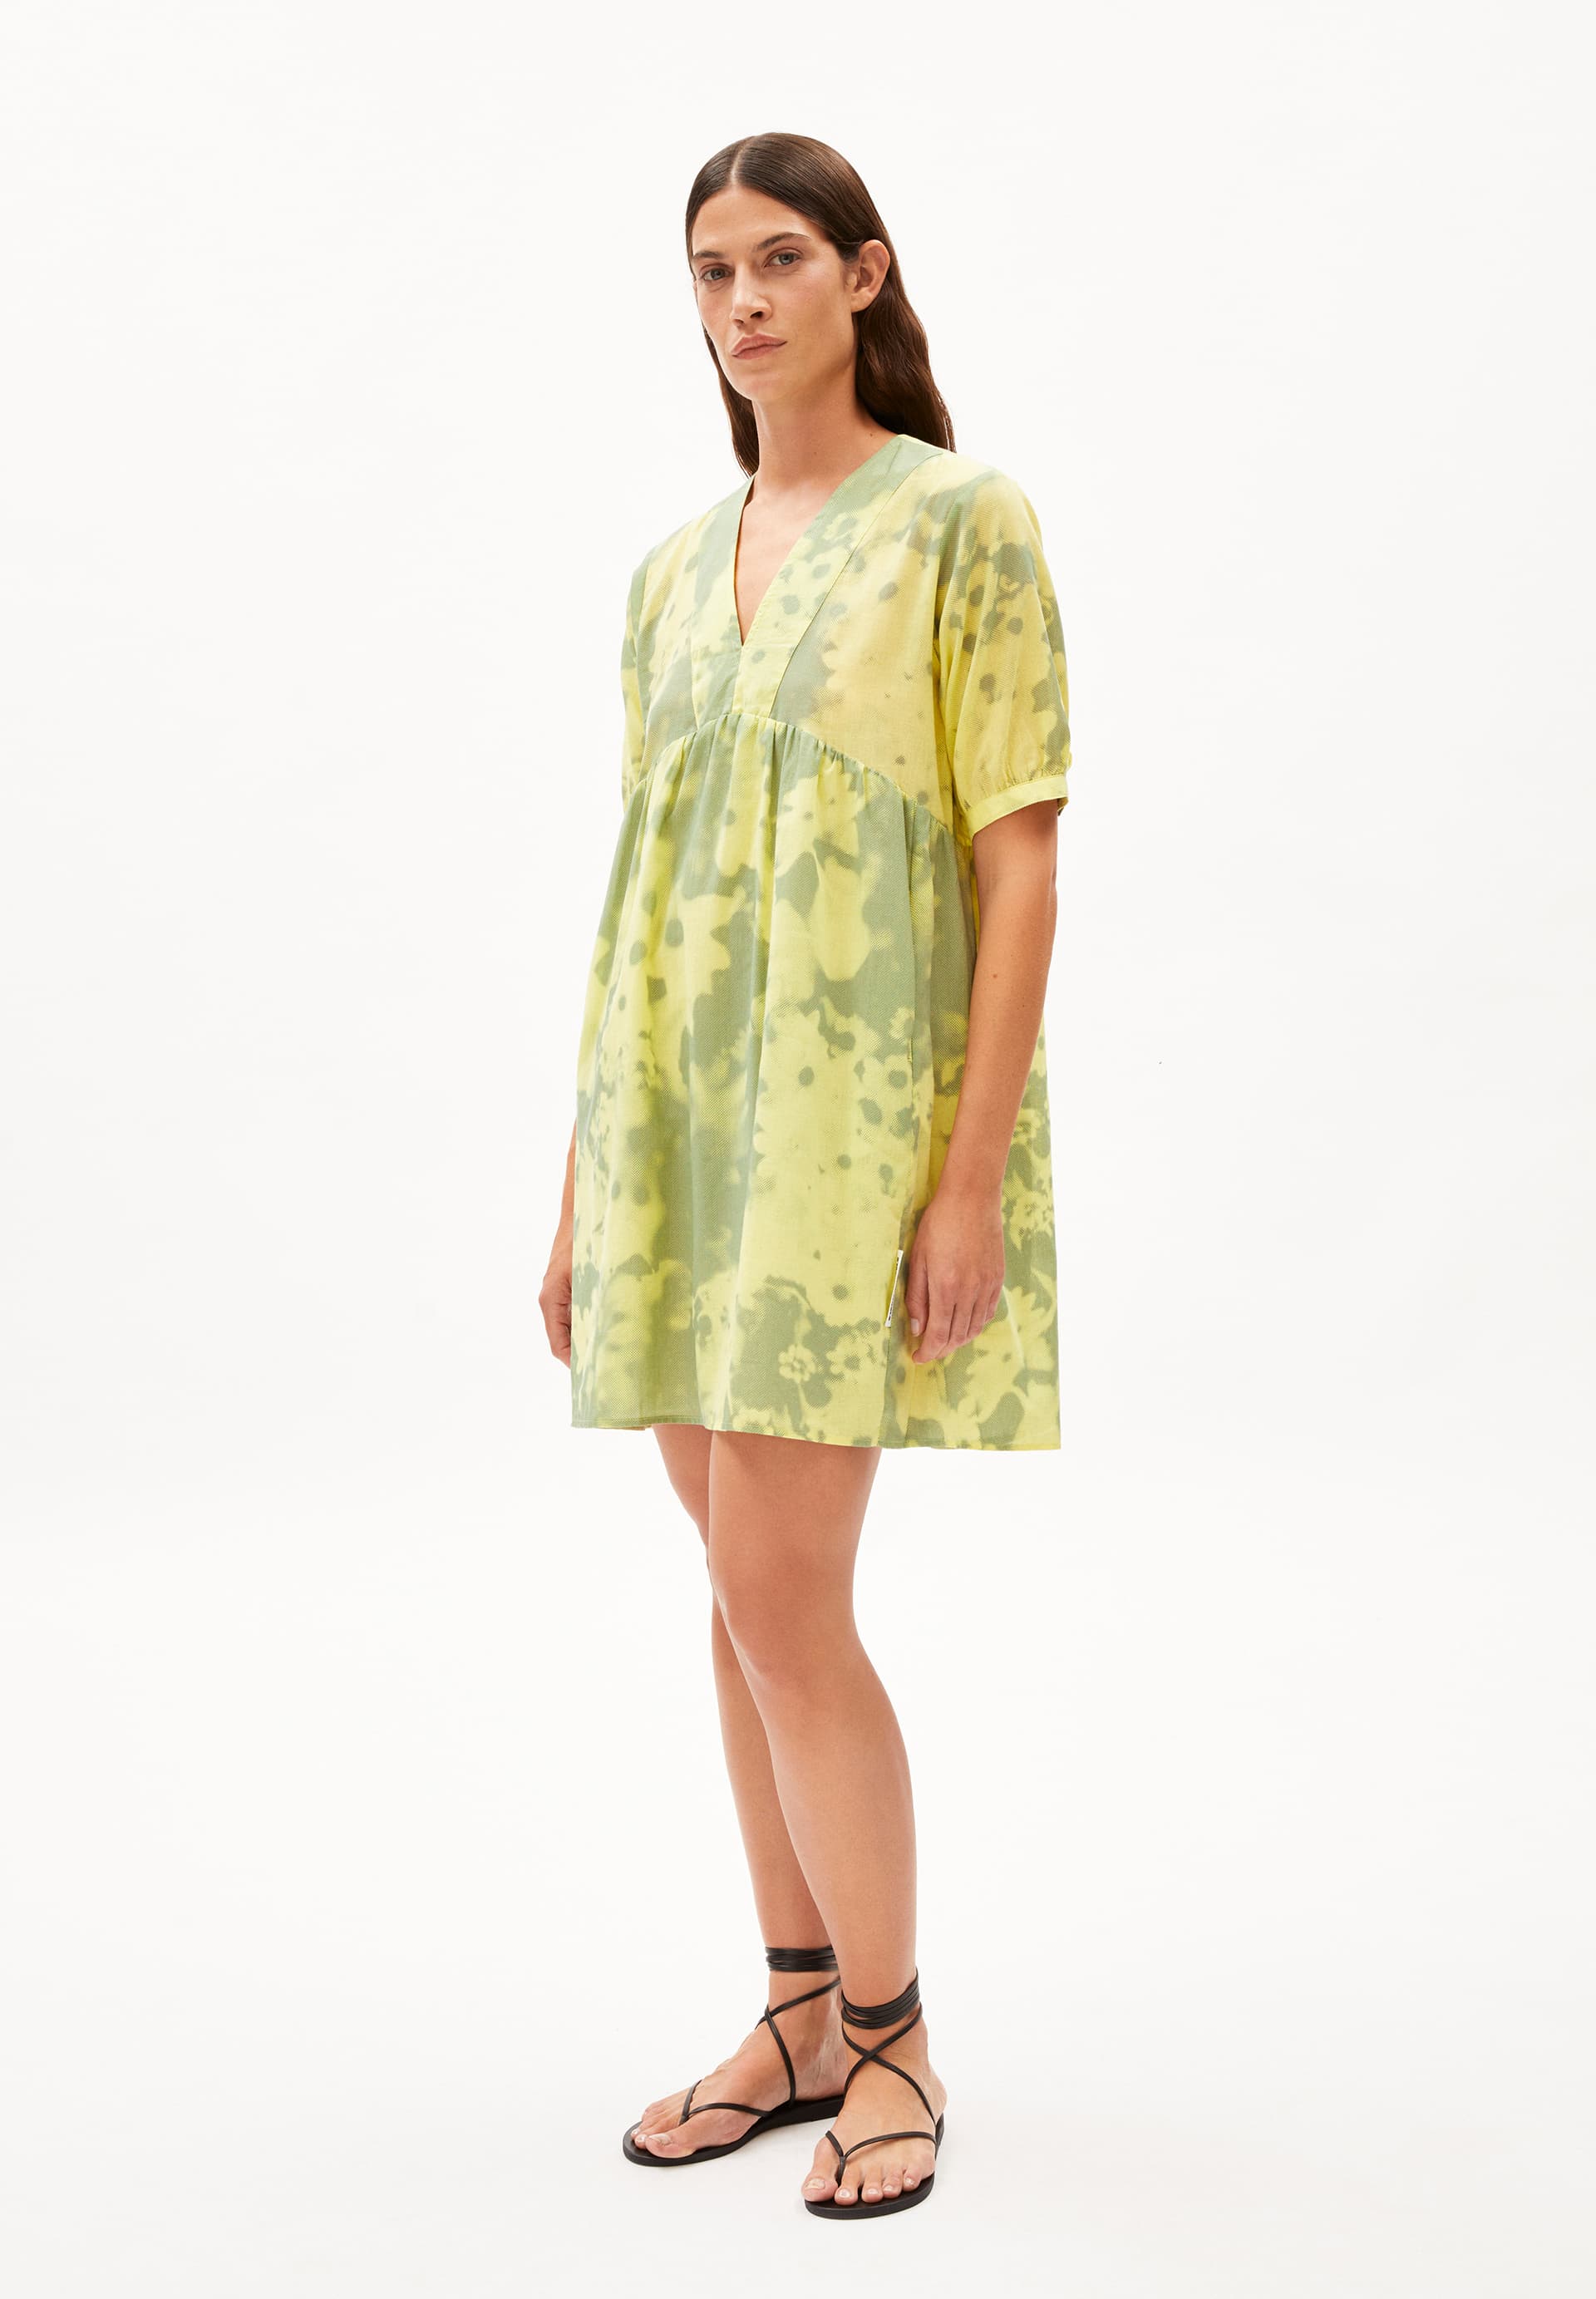 FLORINDAA BLOMMAA Woven Dress Relaxed Fit made of Organic Cotton